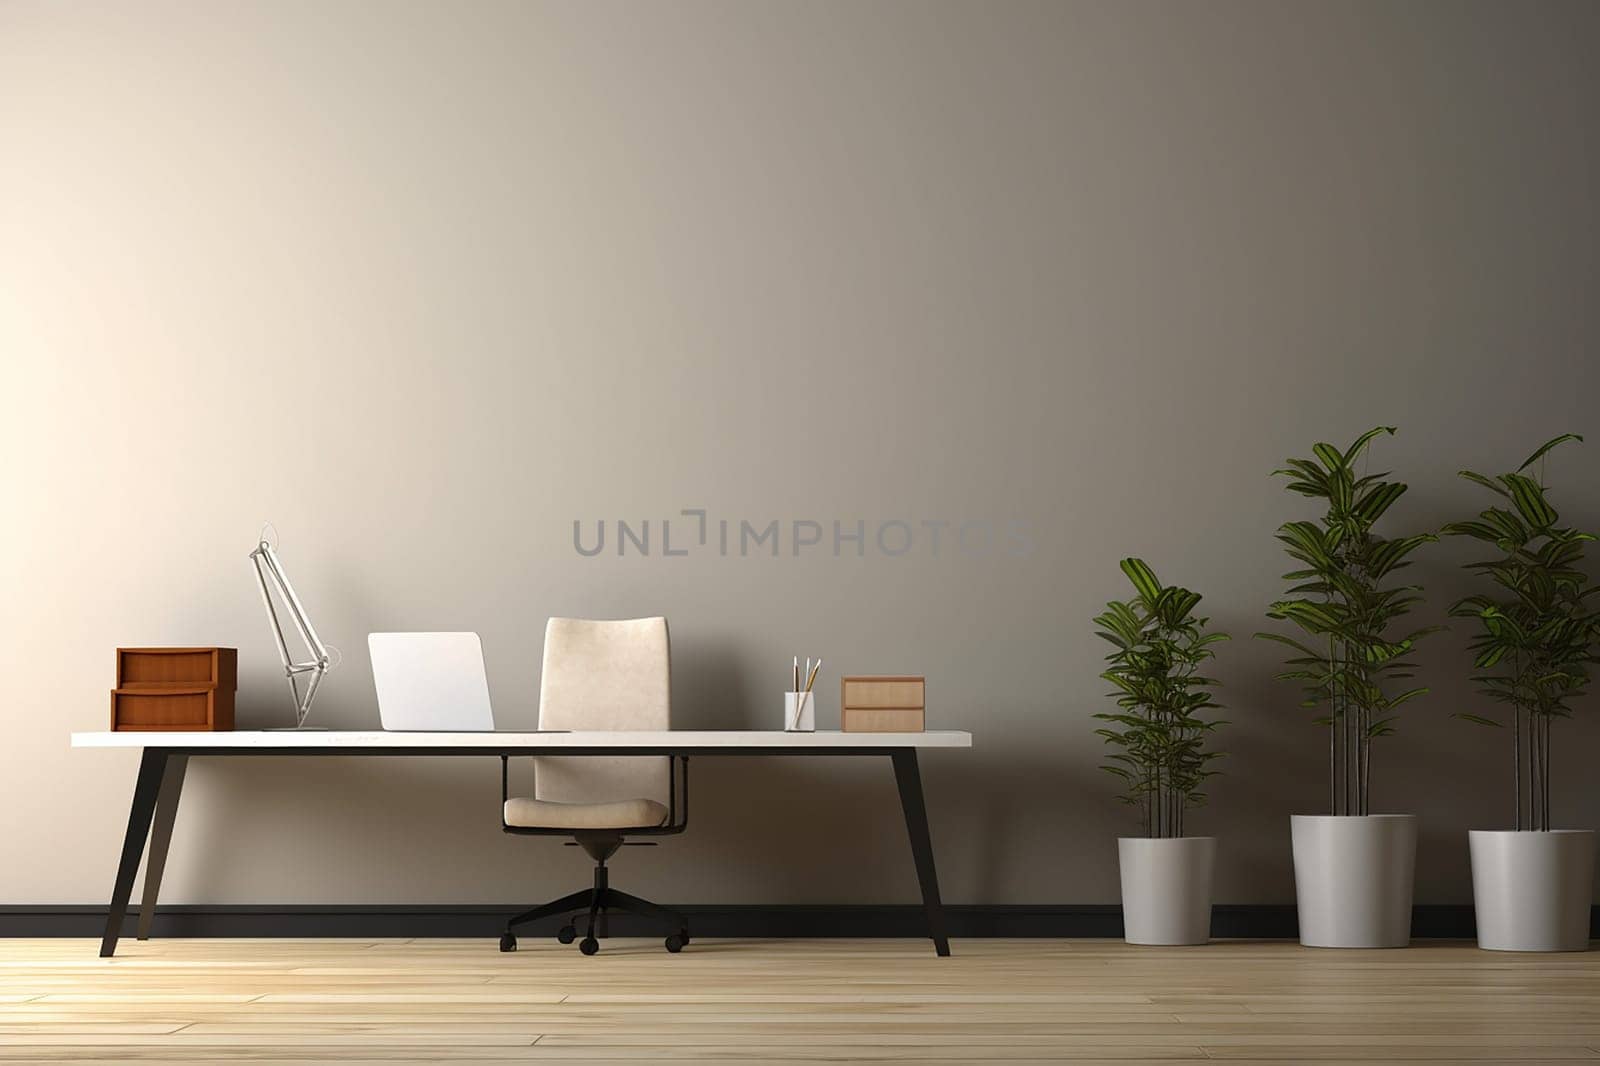 Modern minimalist home office with desk, chair, laptop, decorative plants, and wall art. Clean interior design.